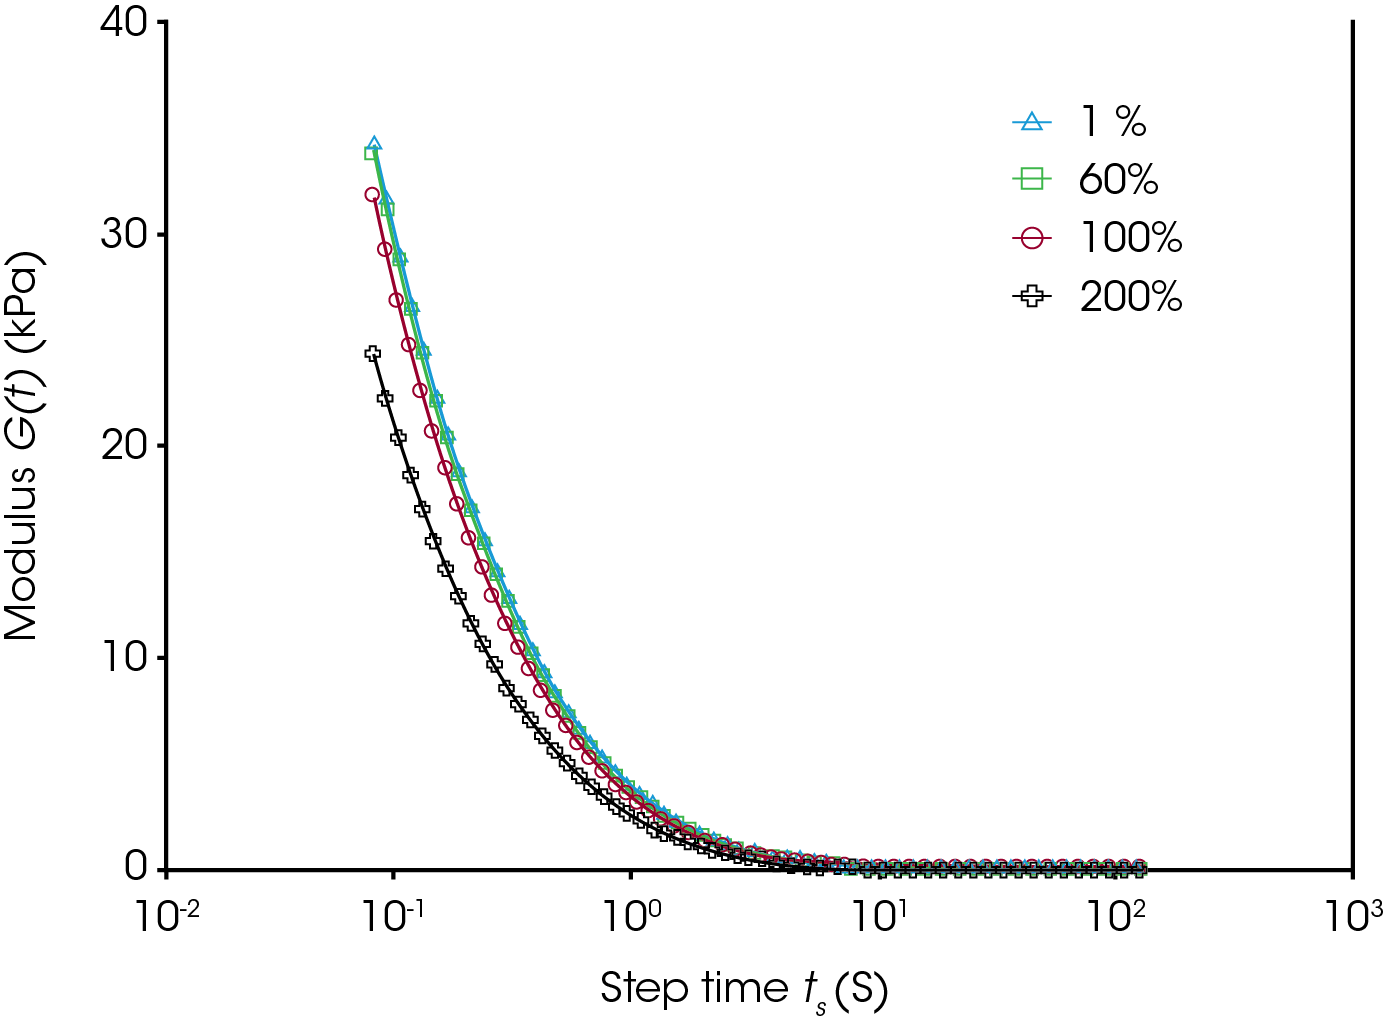 Figure 2. Stress relaxation test on PDMS at 30 °C. The 1 and 60 % (blue and green) test give the same relaxation modulus vs time and are within the LVR for this test. The 100 % (red) deviates from the lower strain result and the 200 % strain test has a much lower modulus.